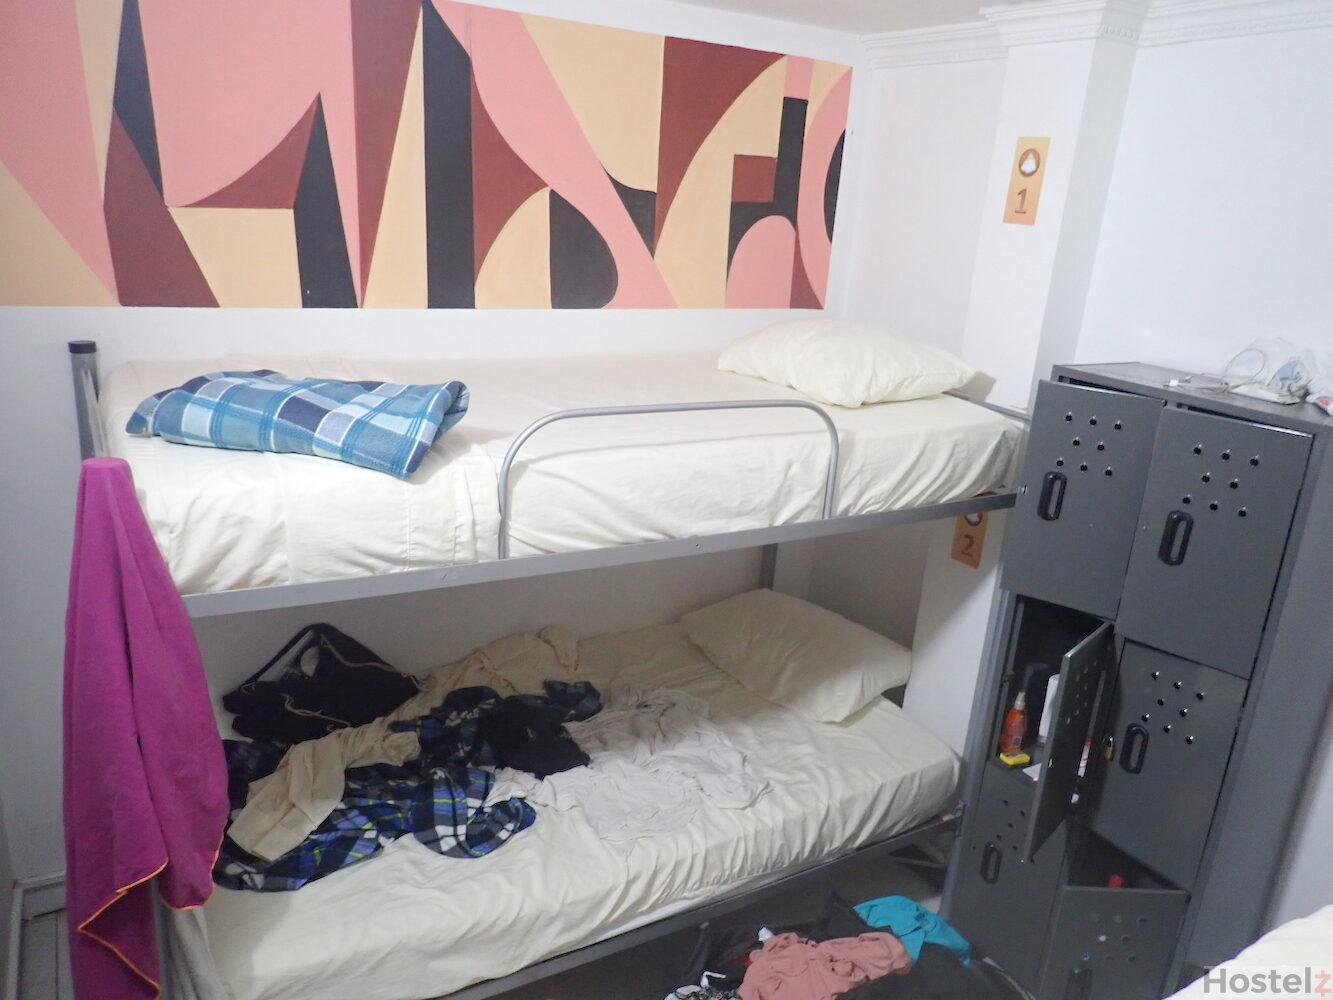 Downstairs dorm room